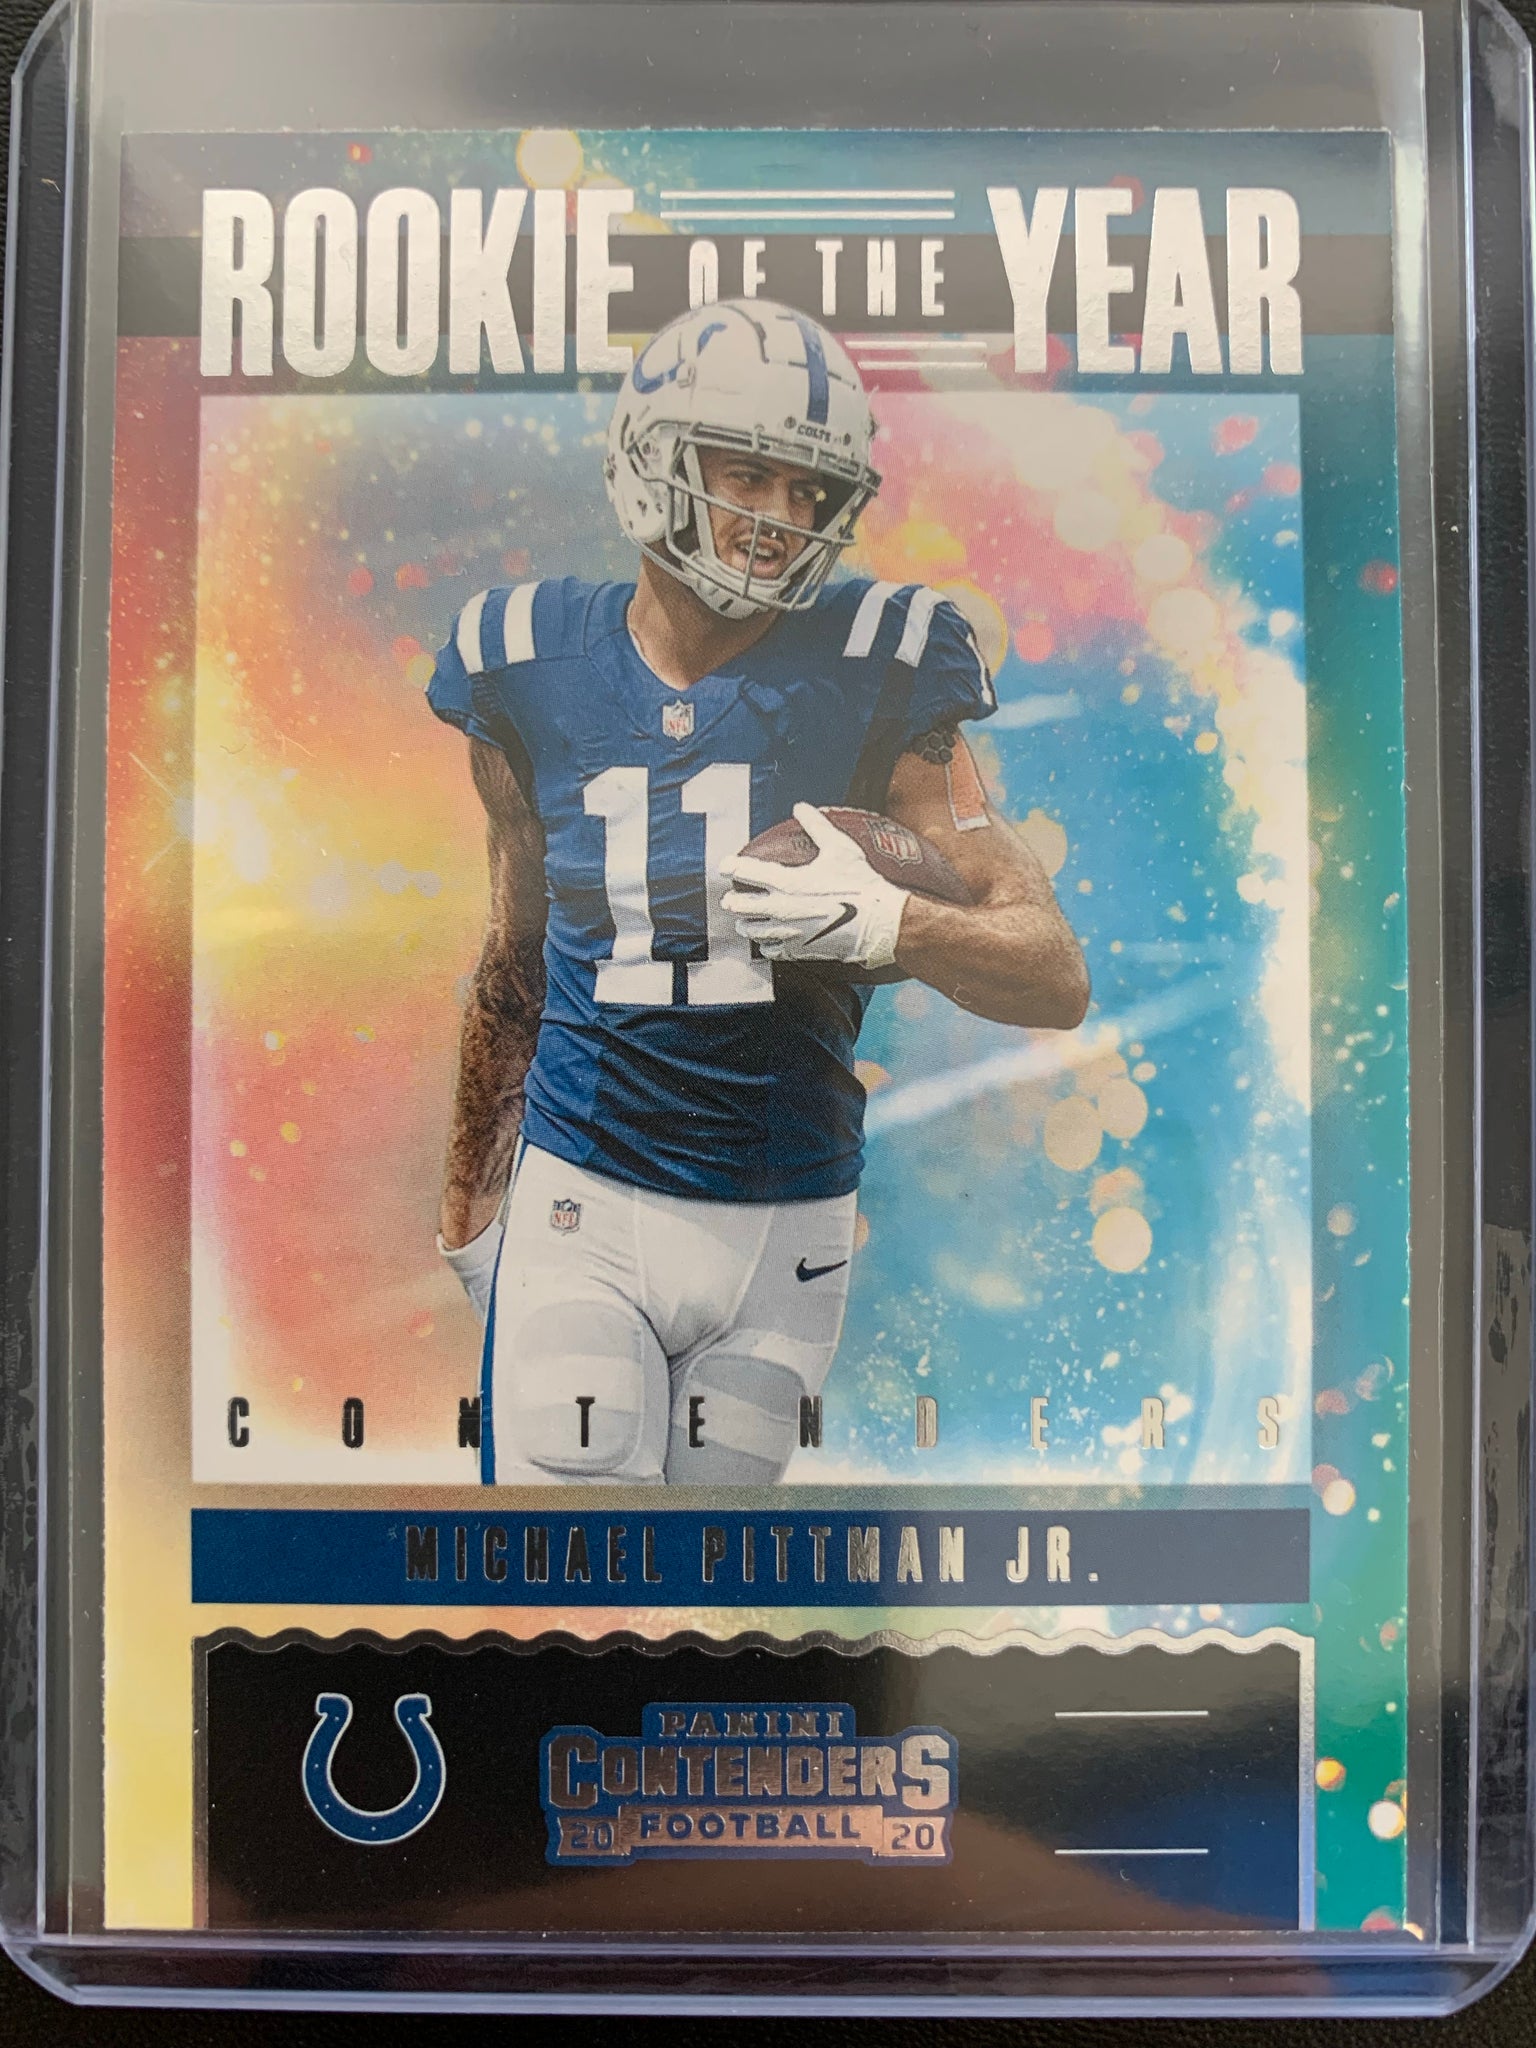 2020 PANINI CONTENDERS FOOTBALL #RY-MPI INDIANAPOLIS COLTS - MICHAEL PITTMAN JR ROOKIE OF THE YEAR INSERT ROOKIE CARD